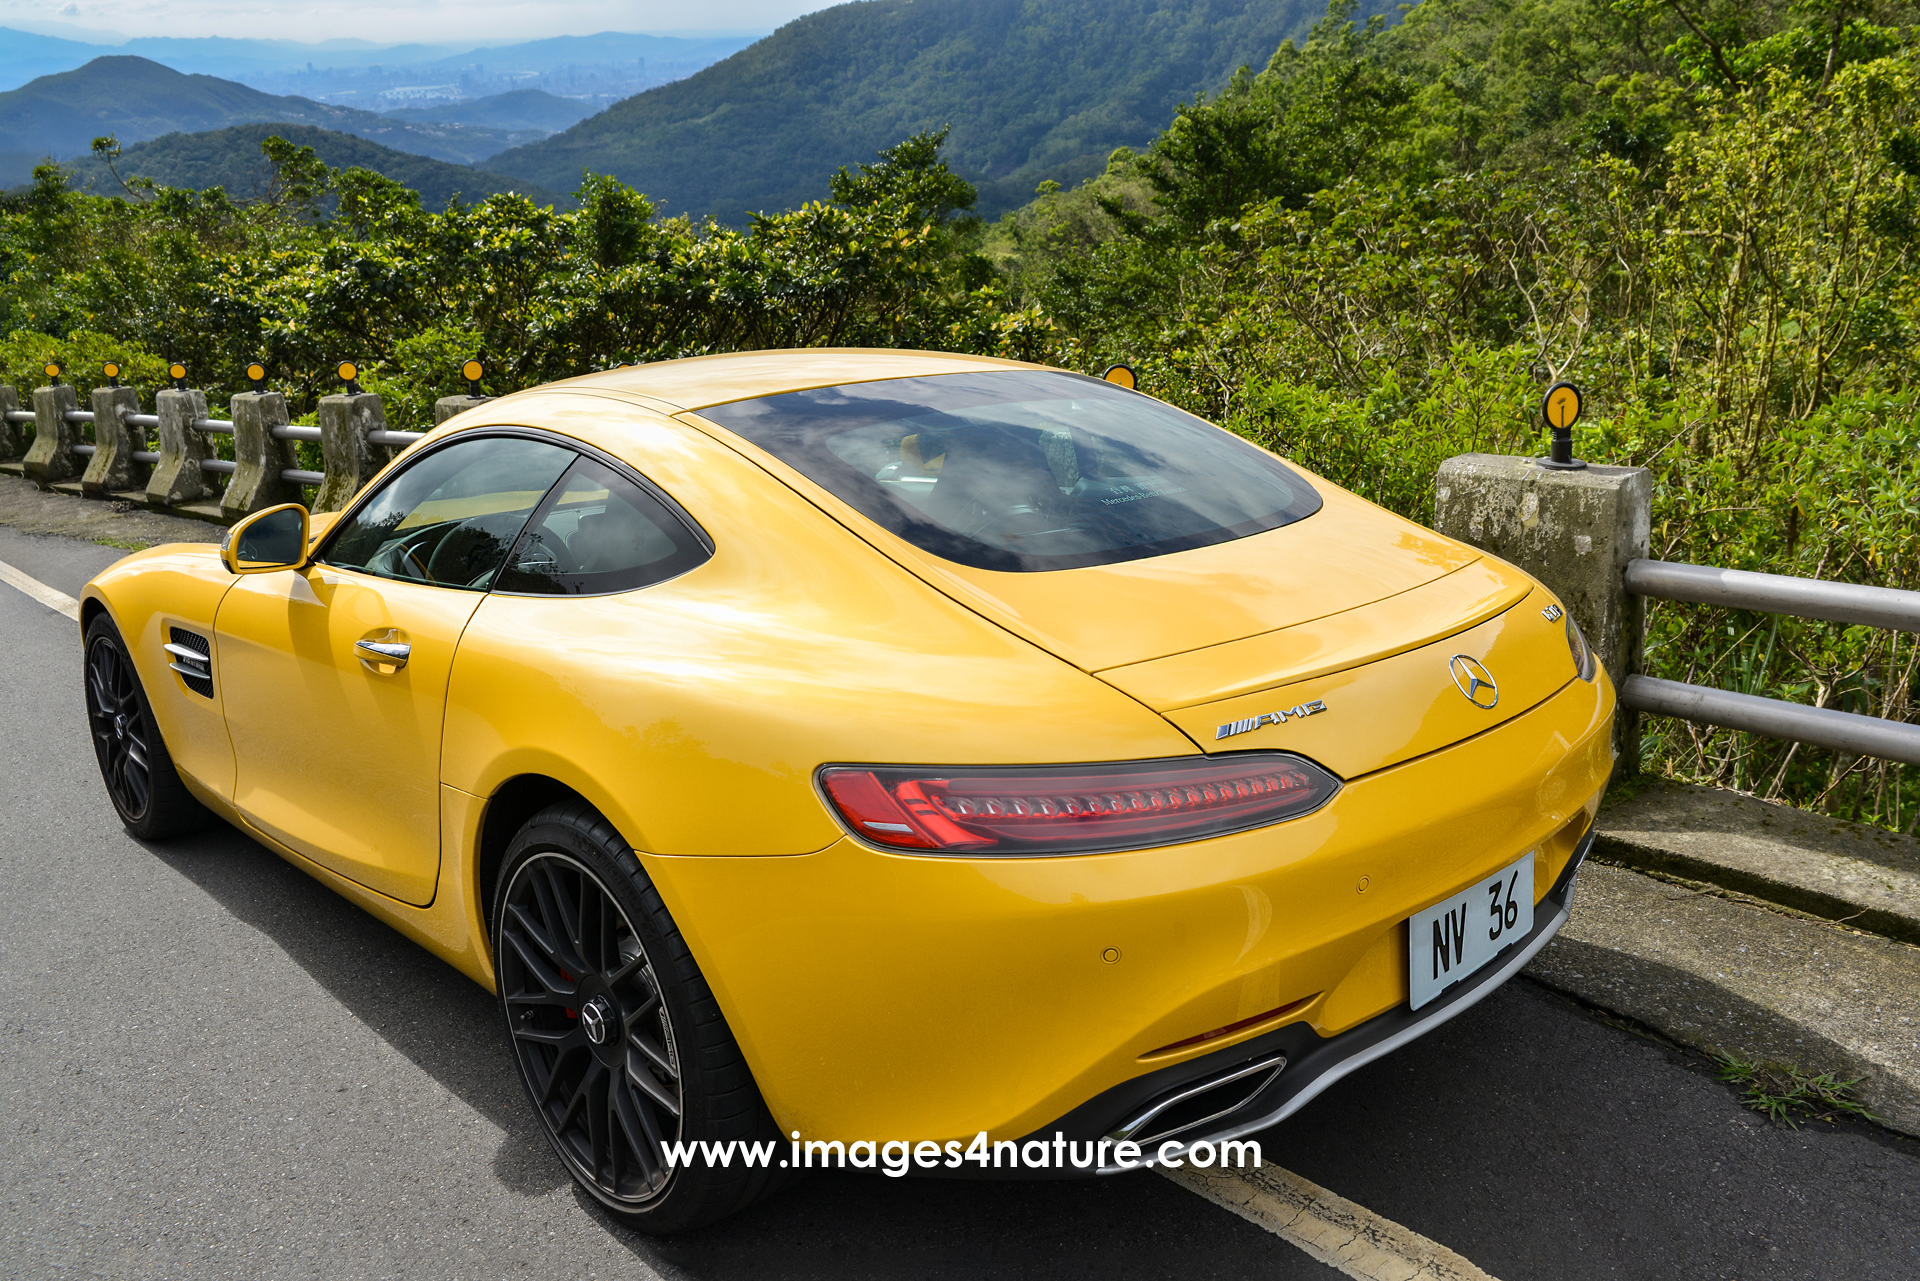 Left rear view of Mercedes AMG GT on Yangmingshan mountain